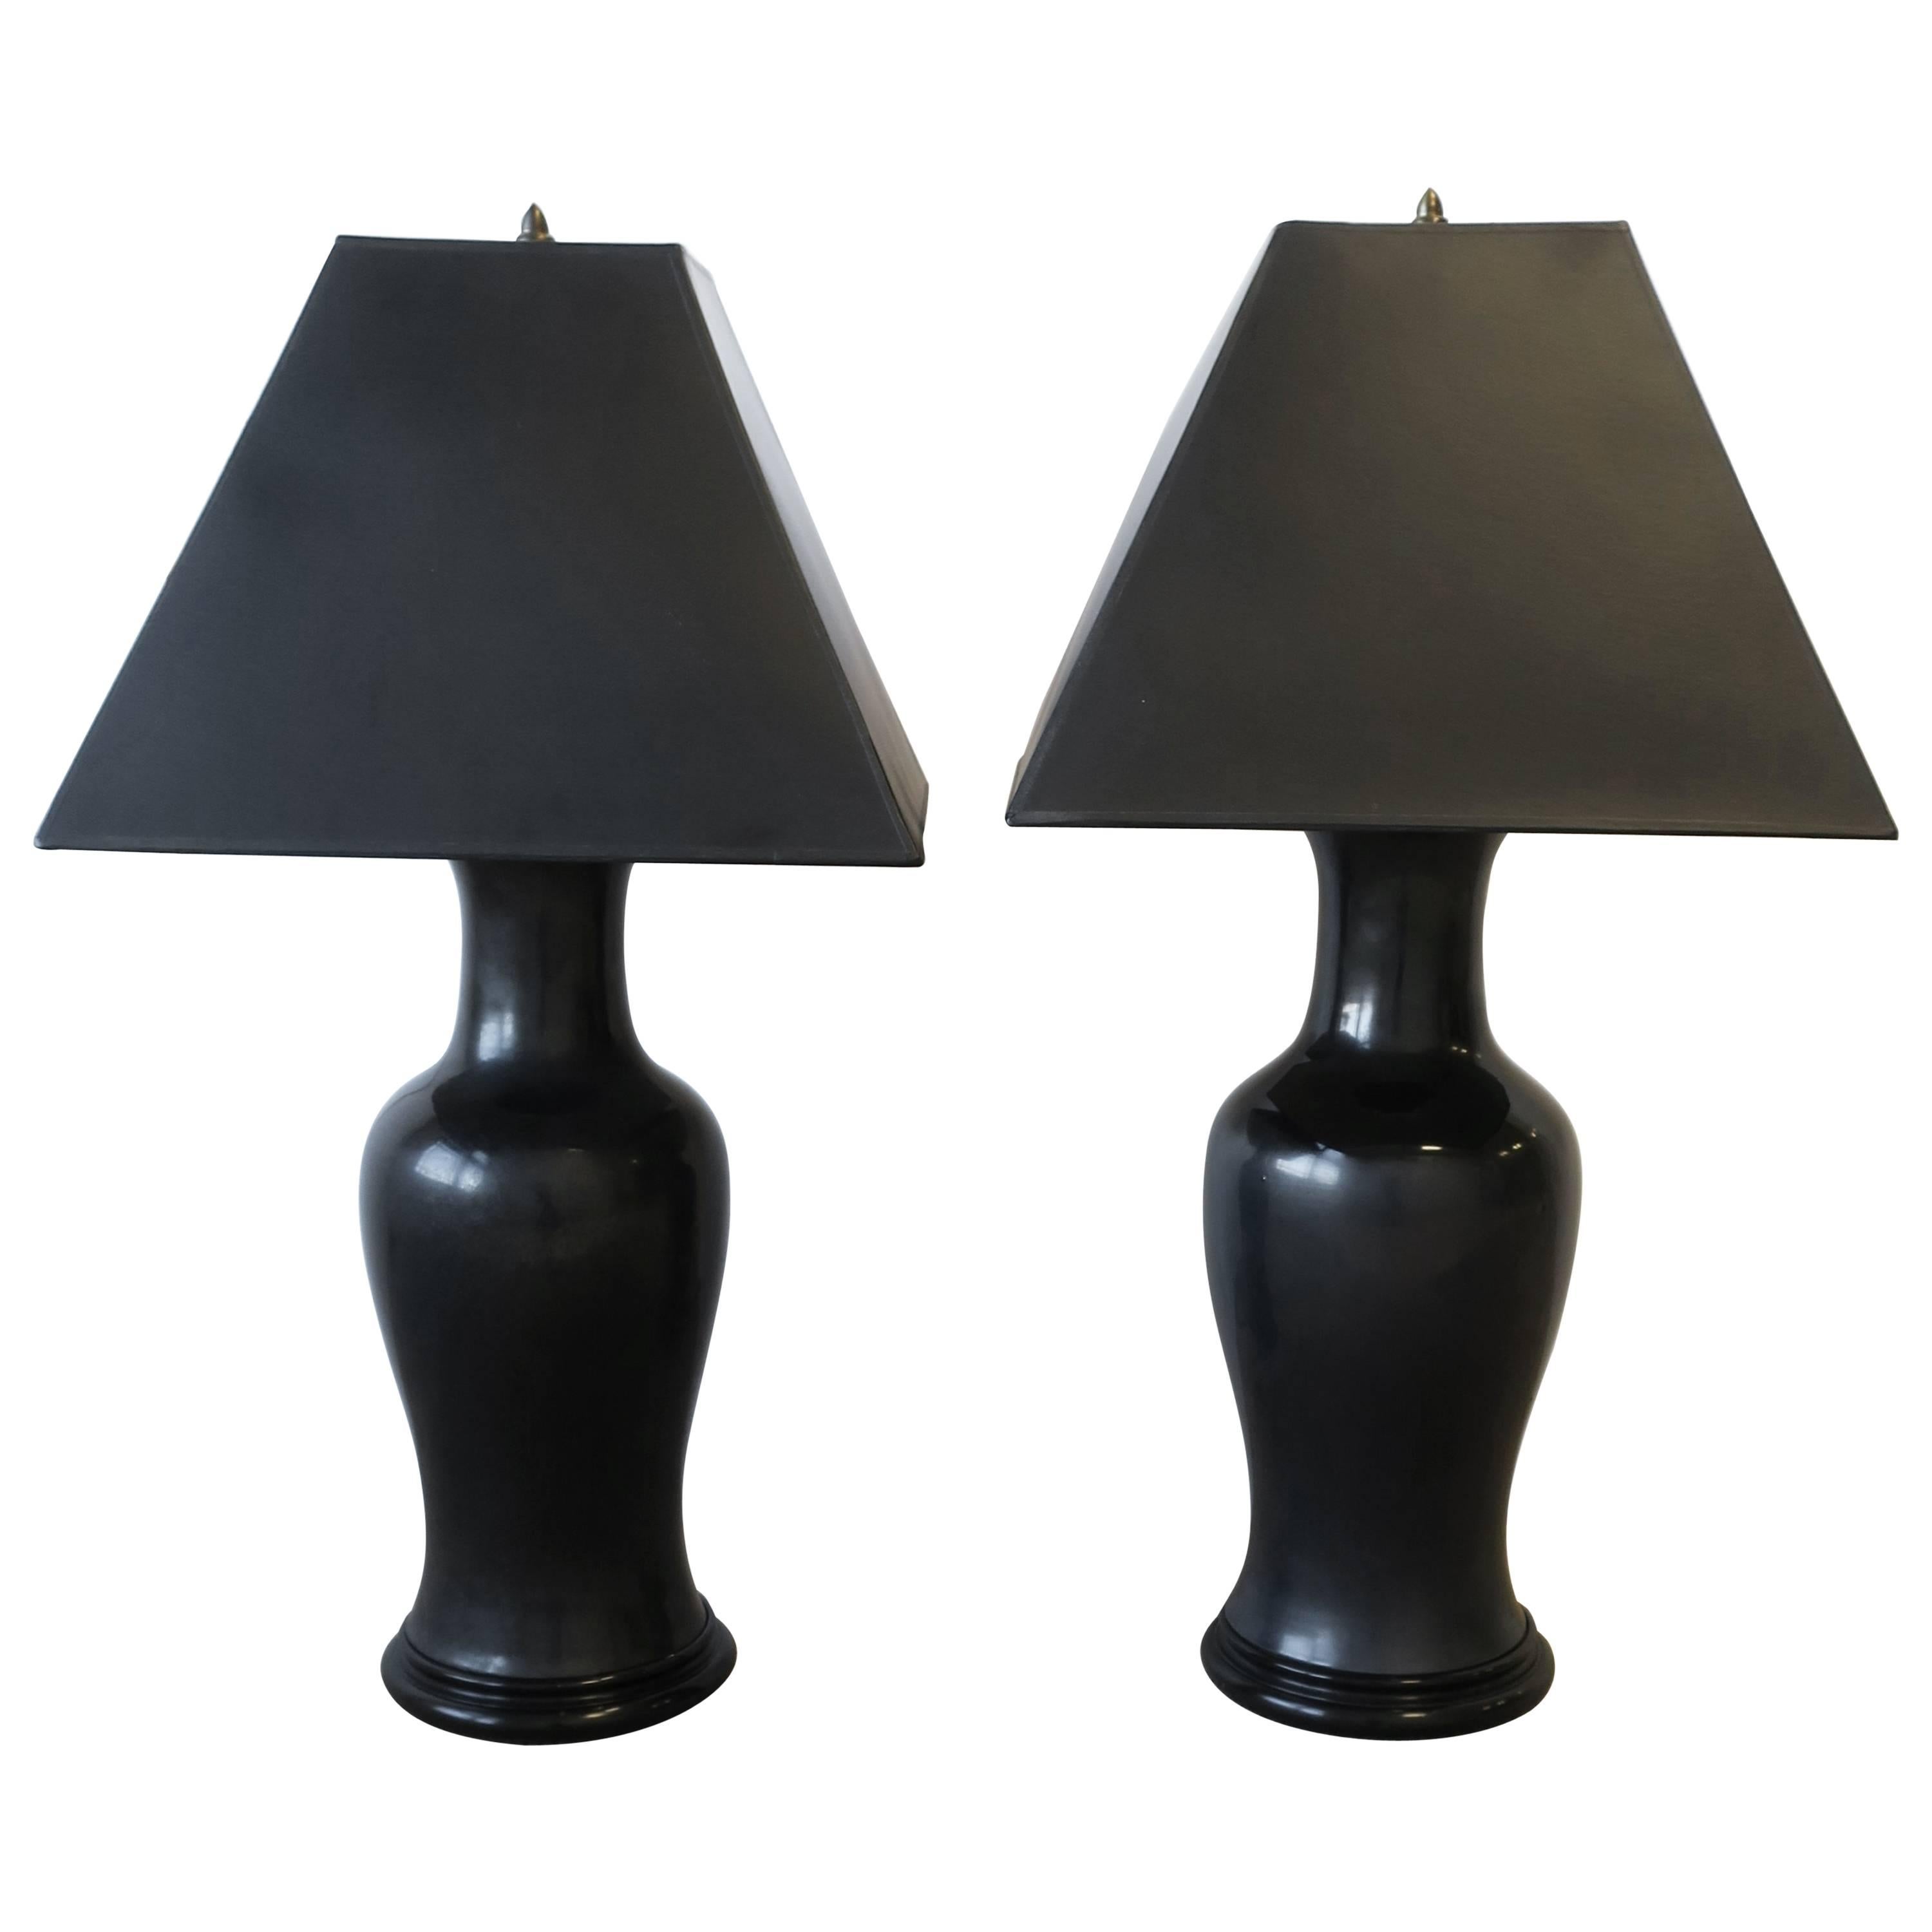 Black Ginger Jar Ceramic Pottery and Brass Table Lamps, Pair